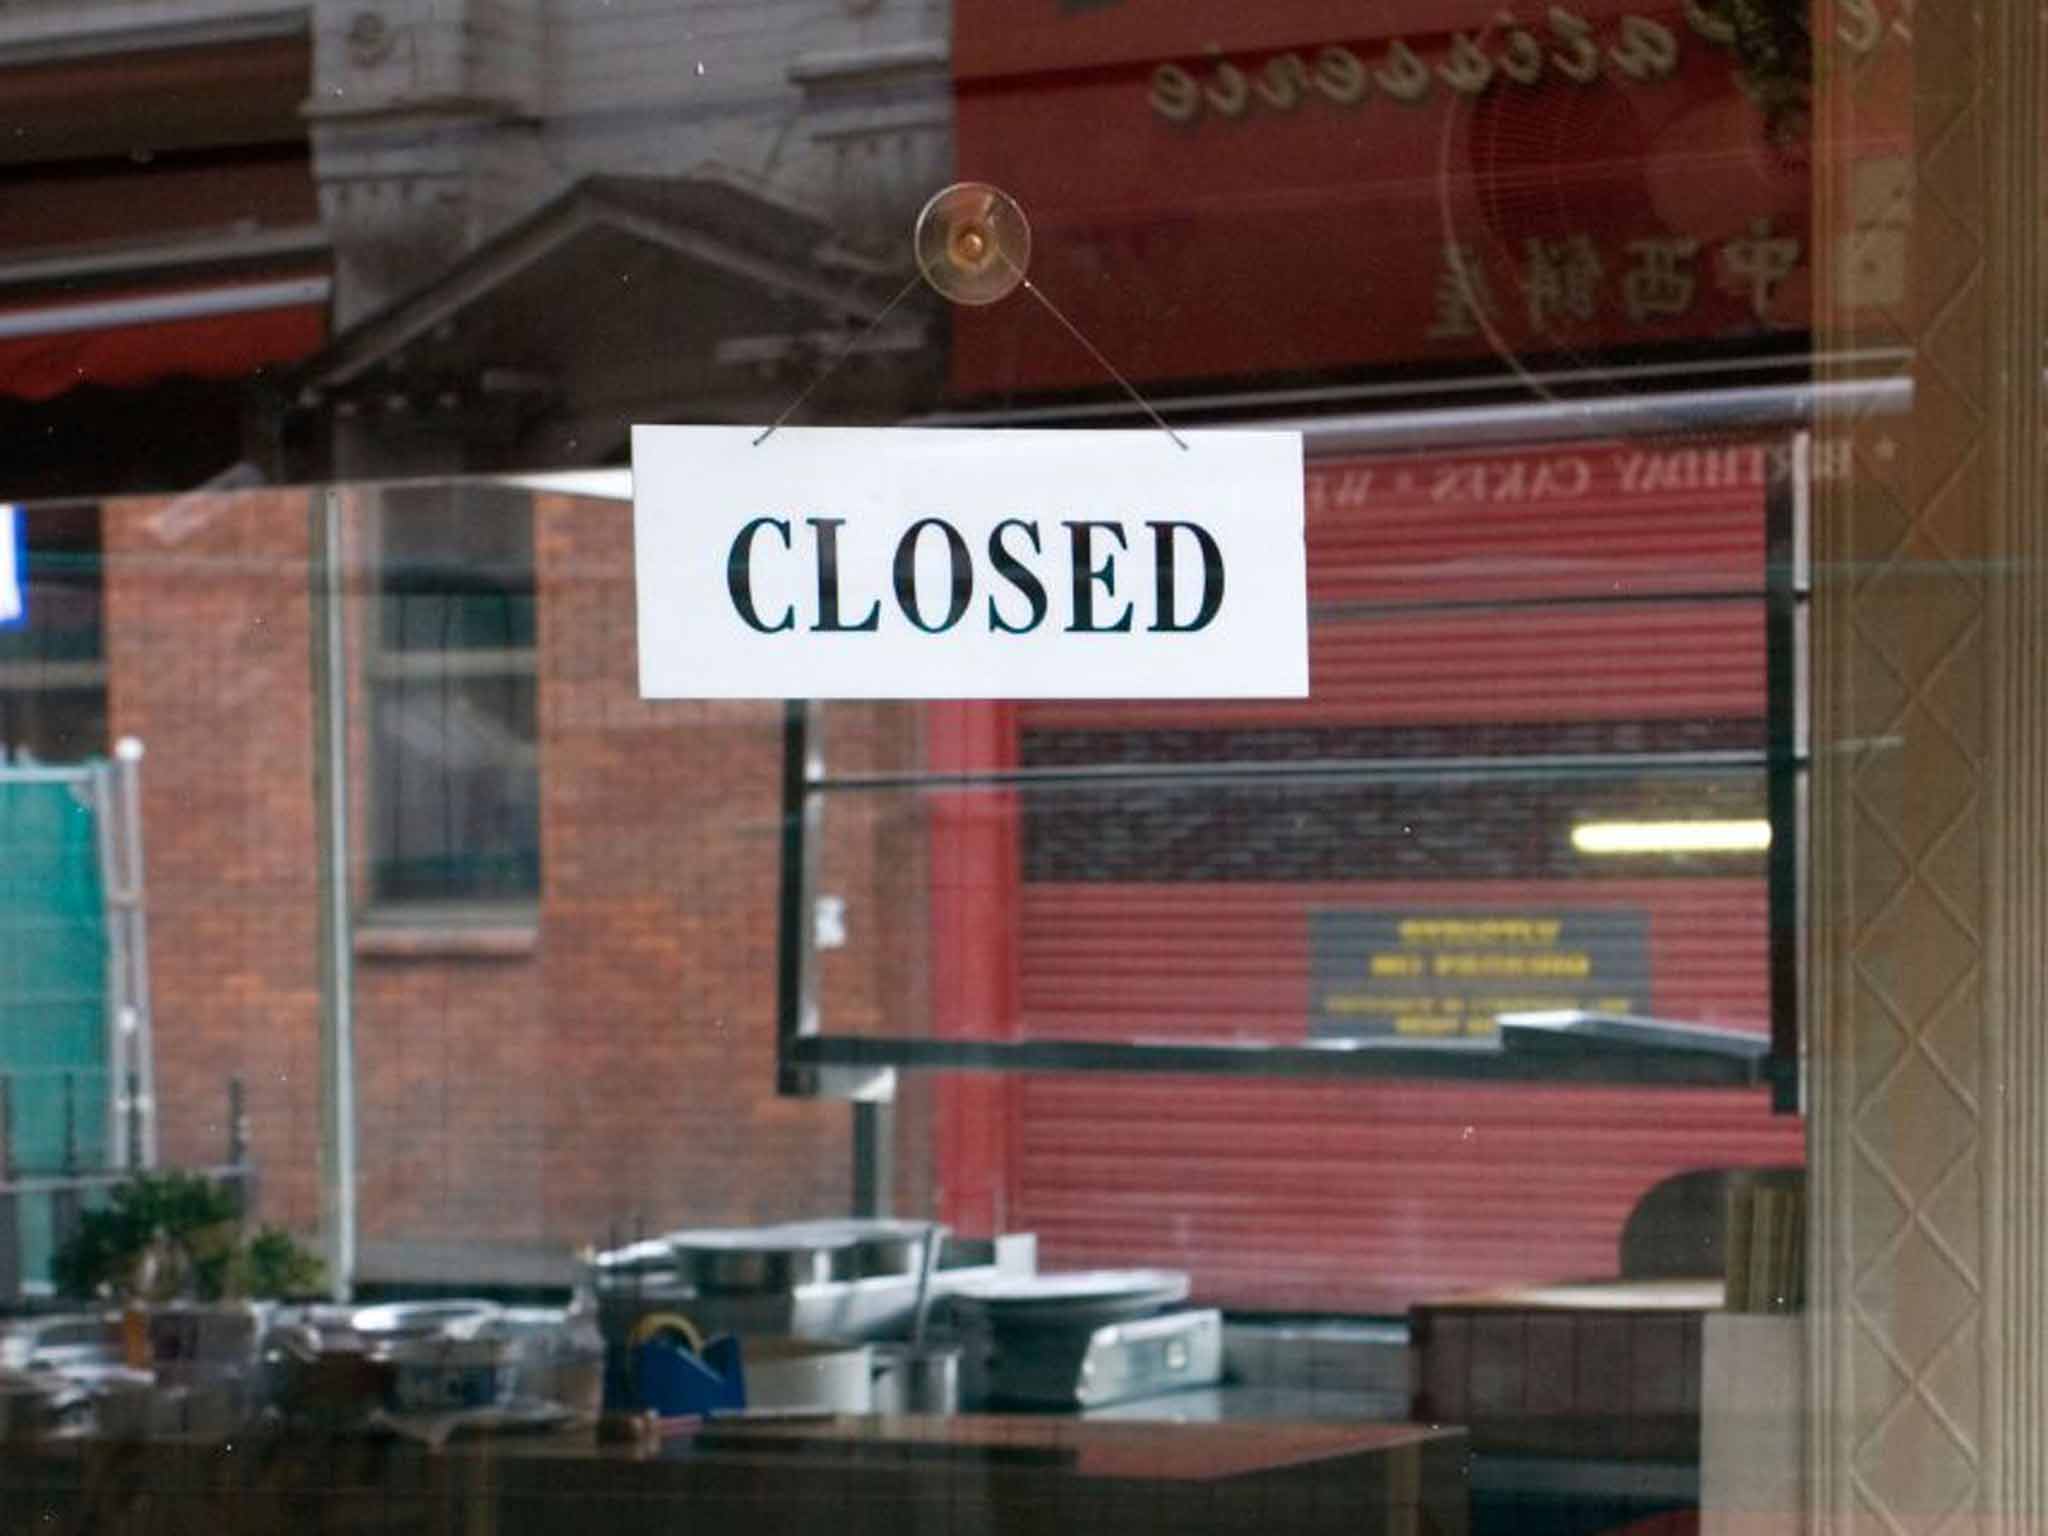 Table for none: some restaurants are closing on set days to allow staff to have more – welldeserved – time off